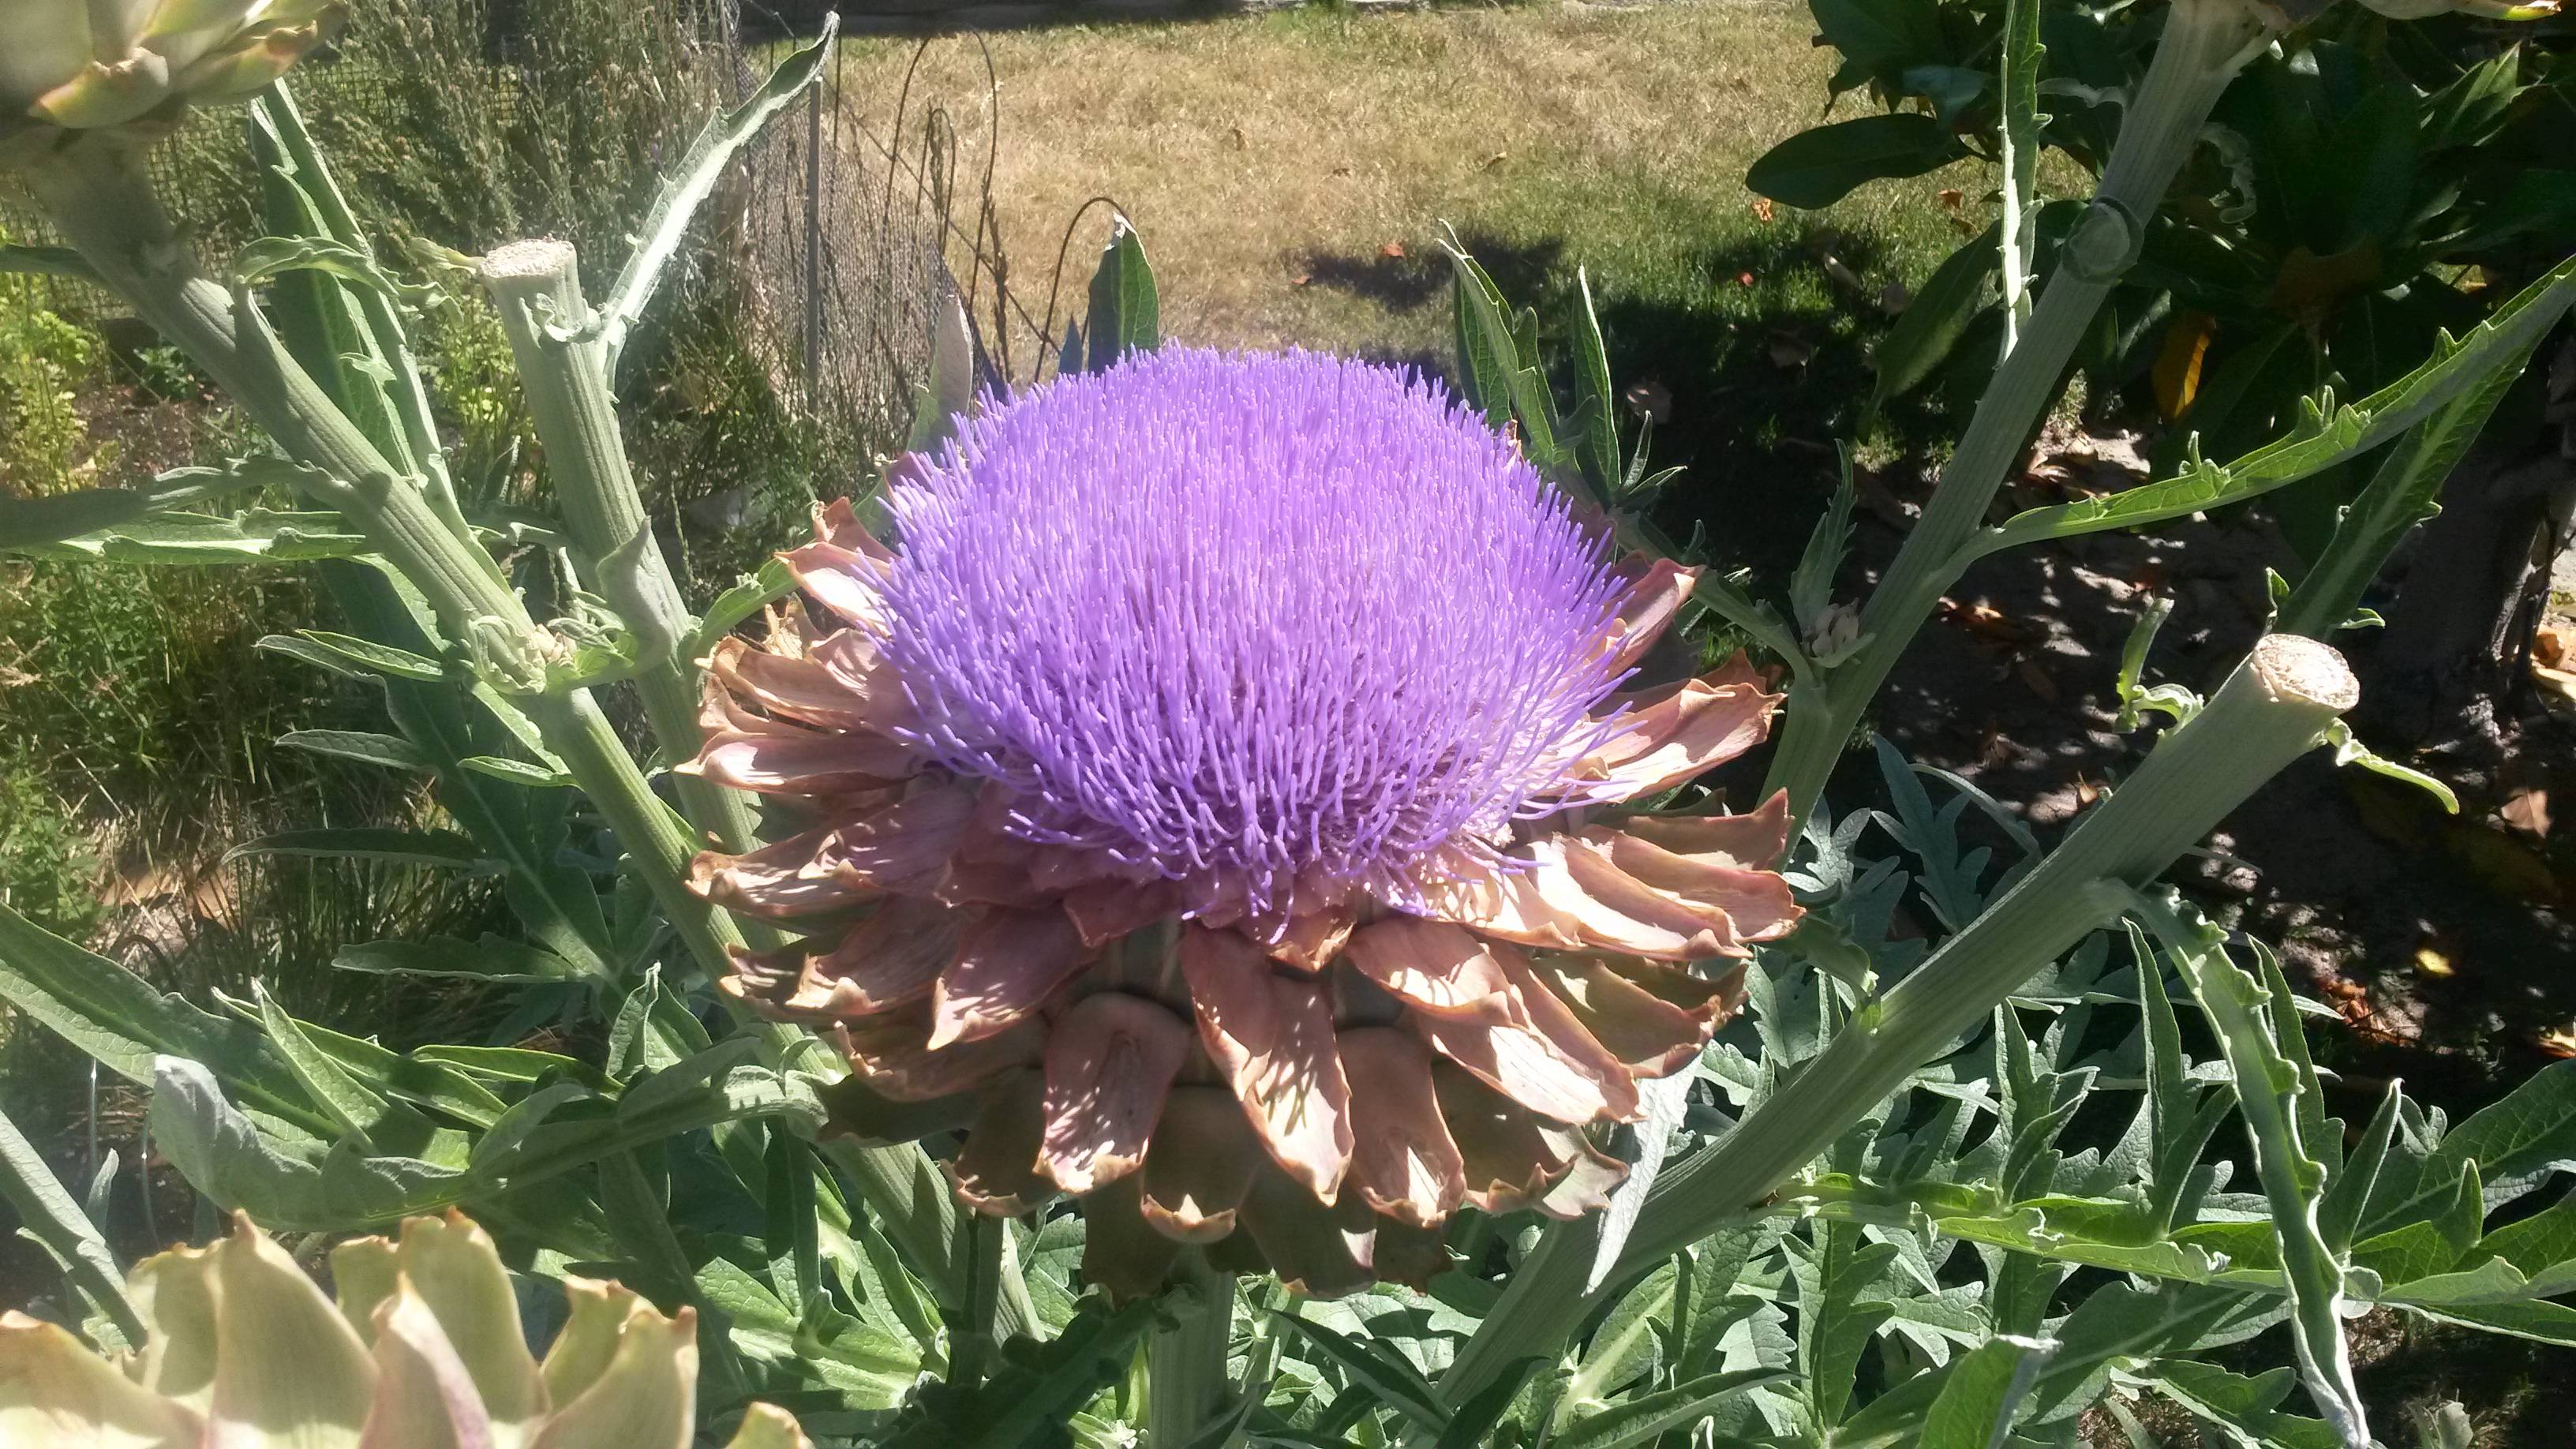 This is what an artichoke looks like if you let it bloom ...